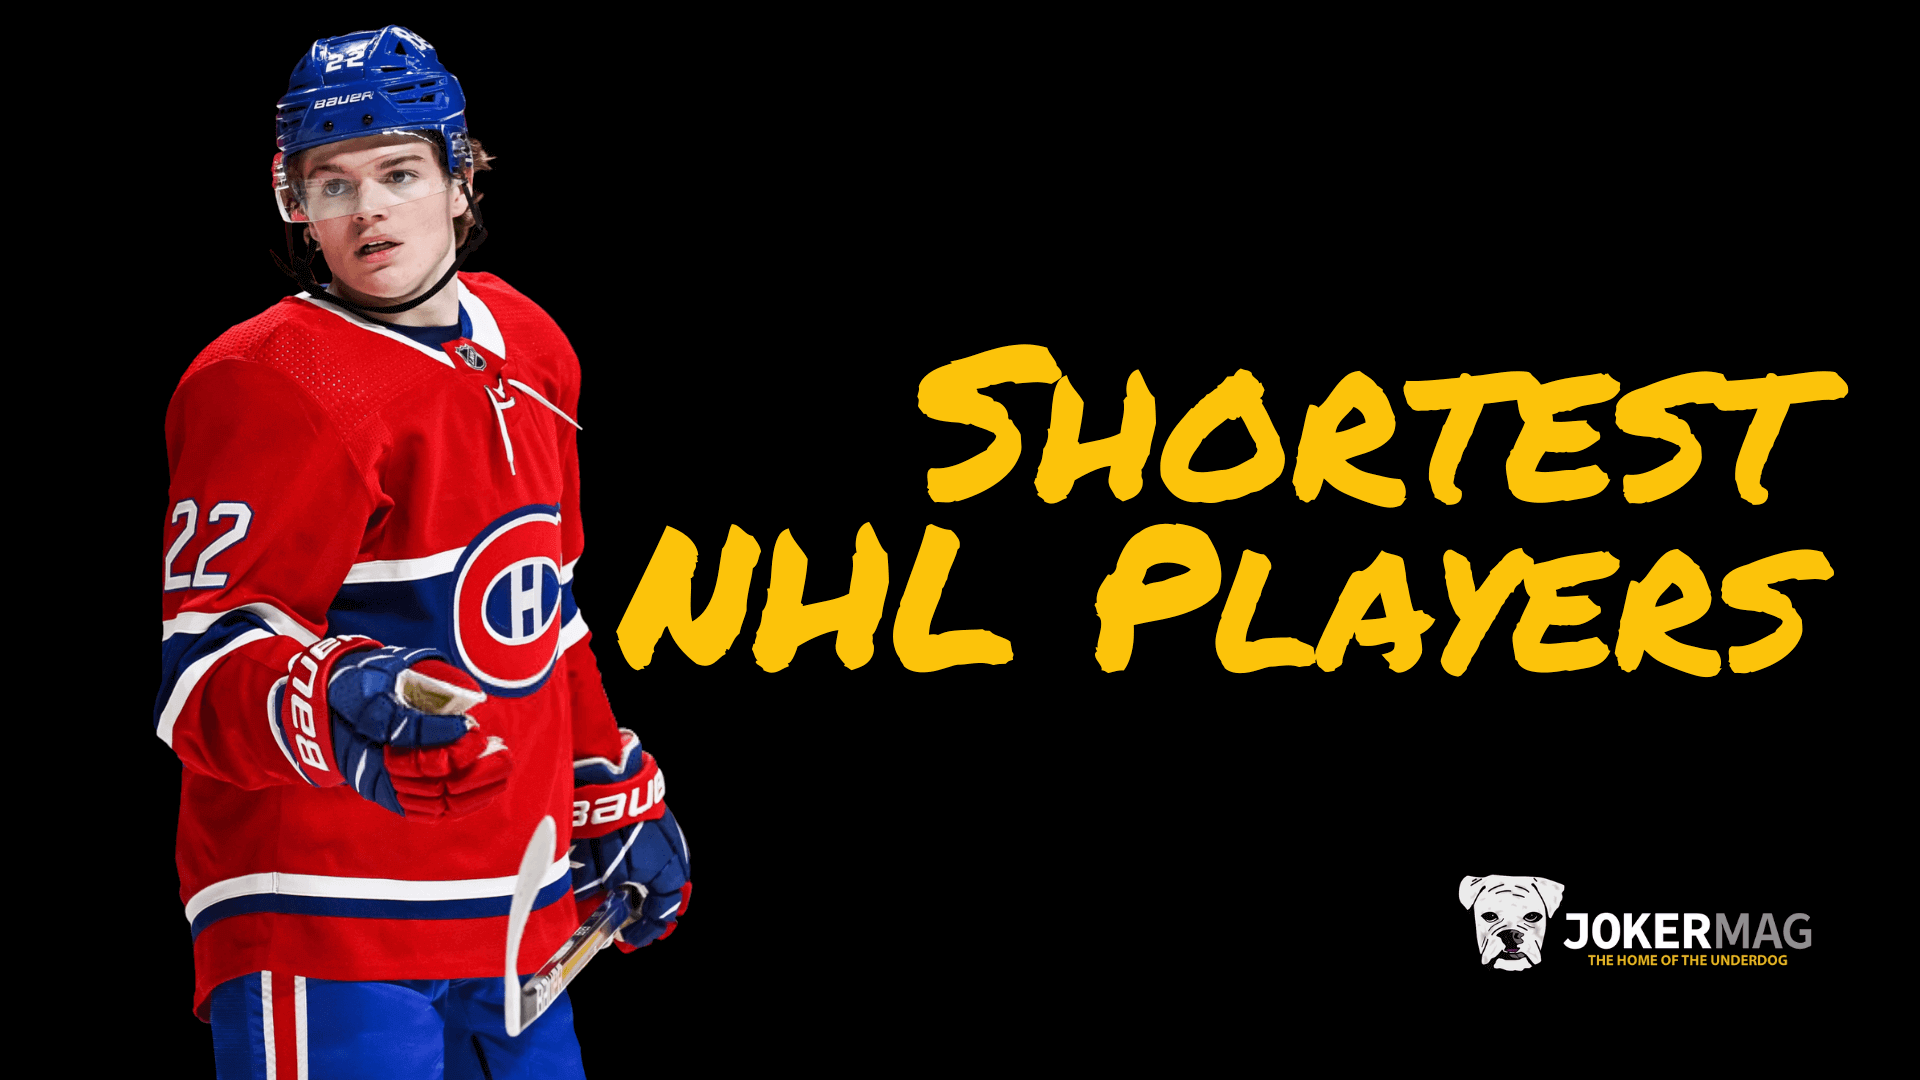 
		Our list of the Shortest NHL players includes Cole Caufield and more